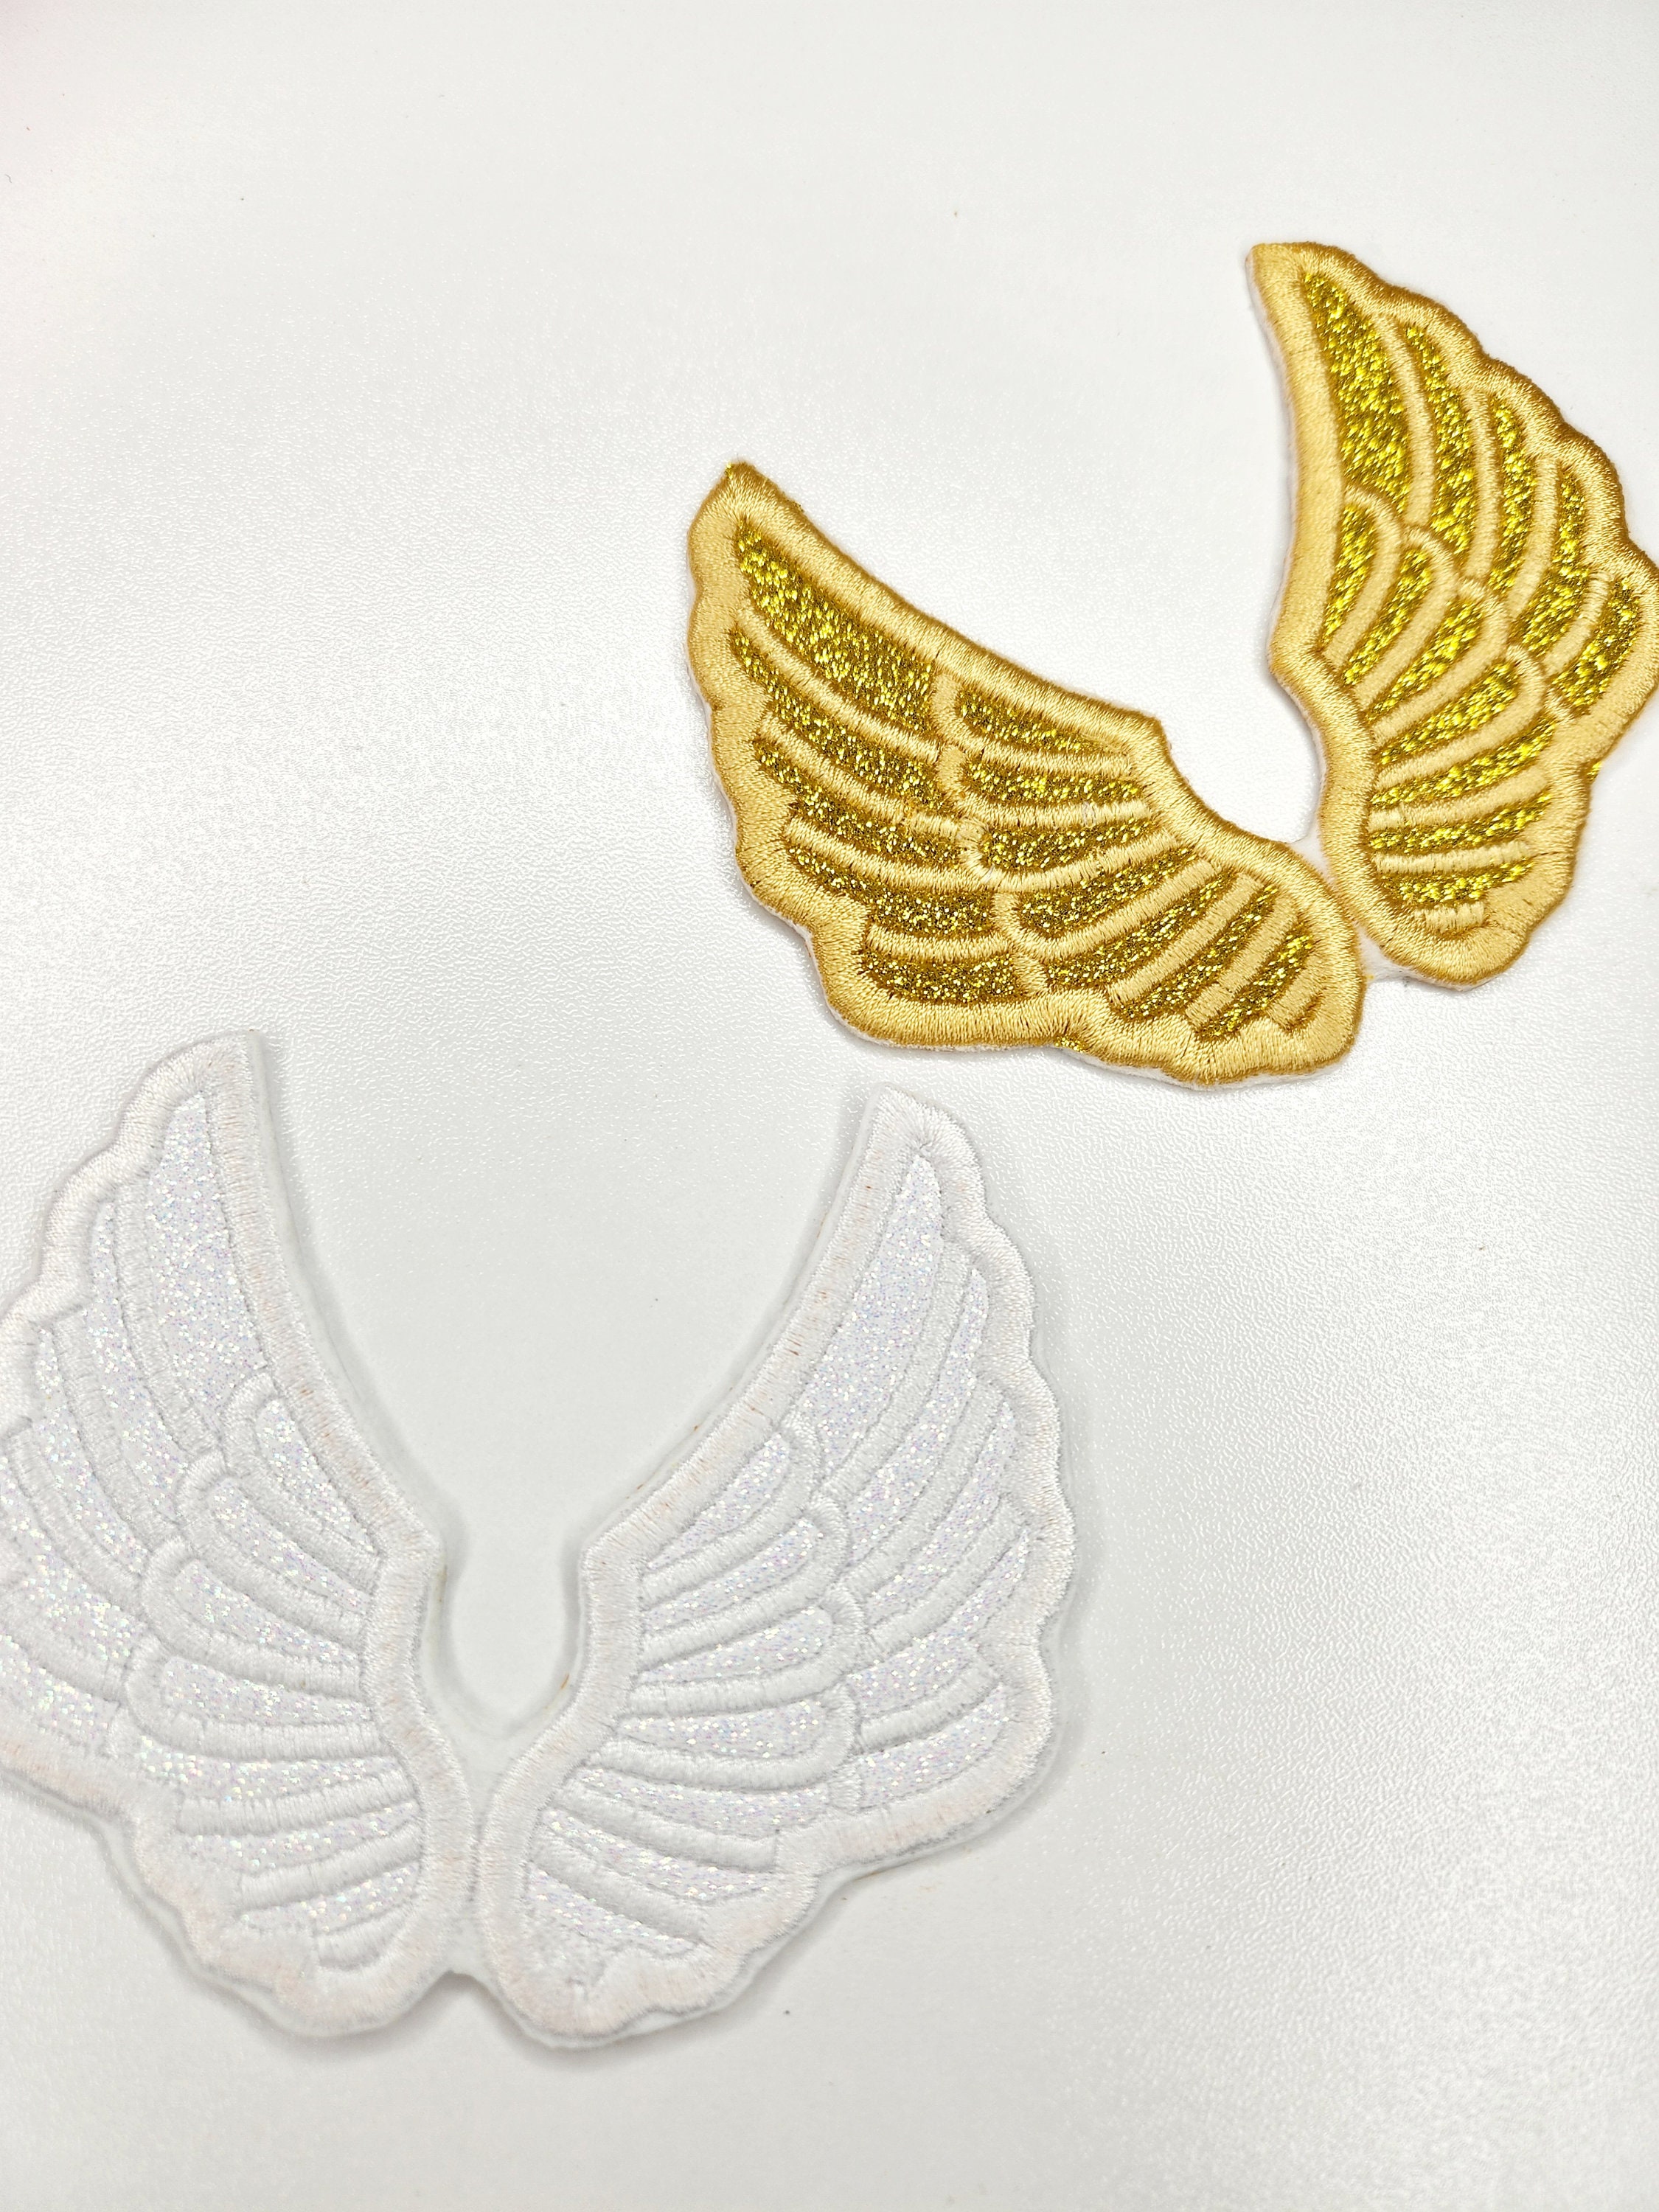 Sequin Angel Wings Iron on Patch, Gold and Silver Angel Embroidery Patches  for Denim Jacket, Patches for Jeans, Patches Set 